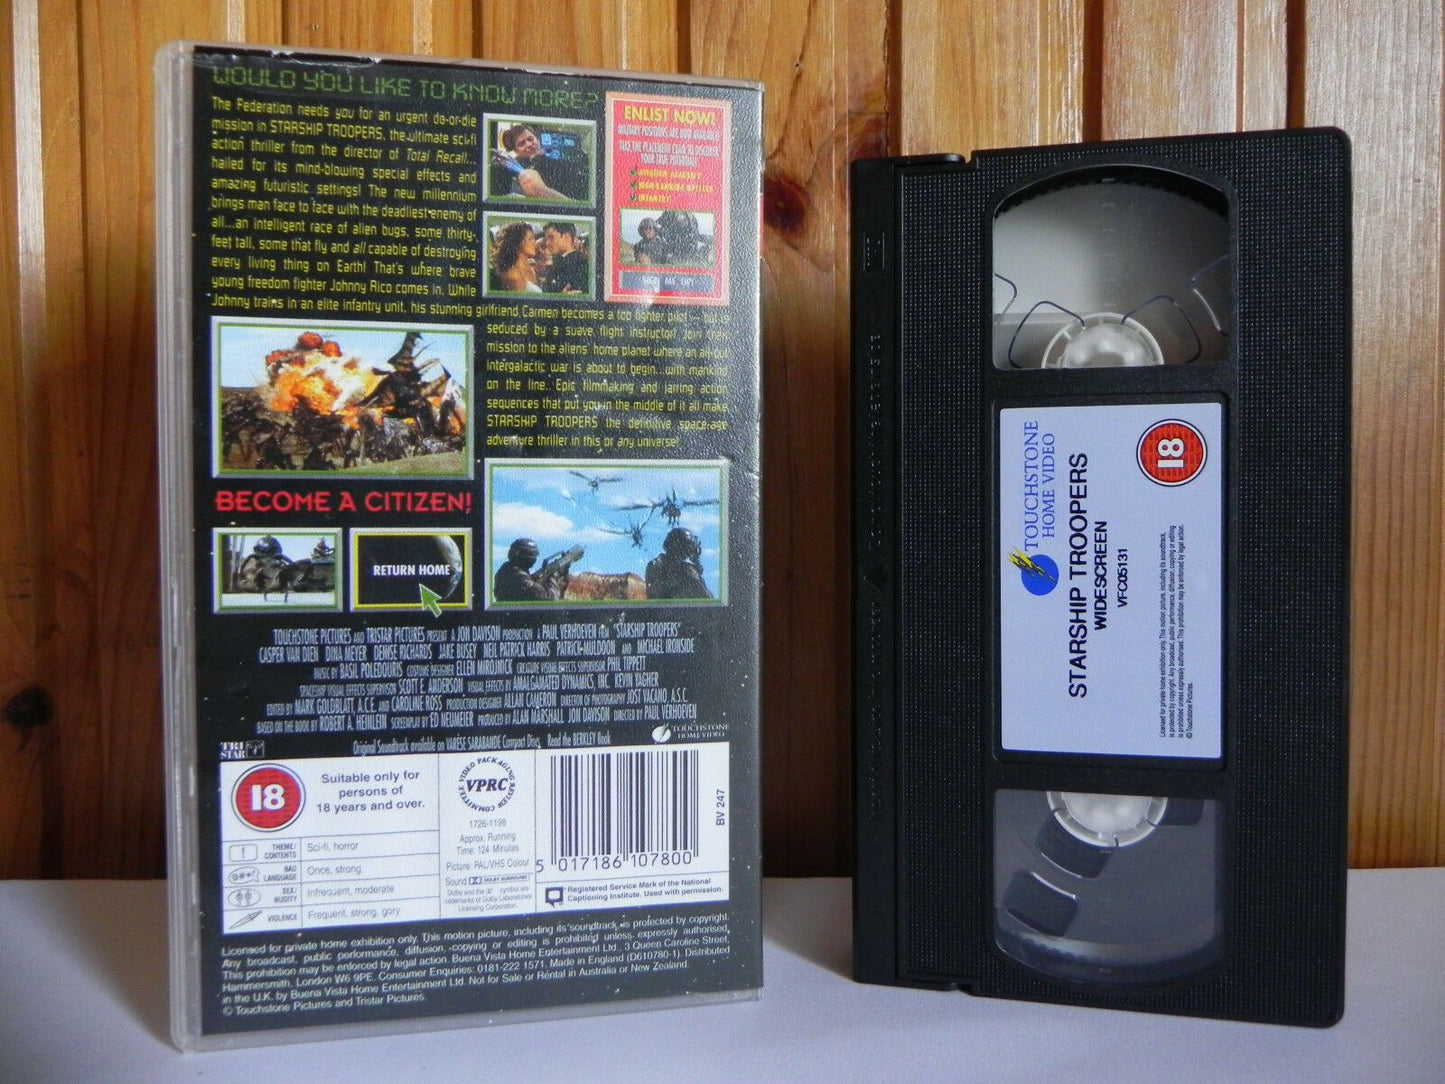 Starship Troopers - Widescreen Release - Alien Shoot"Em"Up - Action Sci-Fi - VHS-